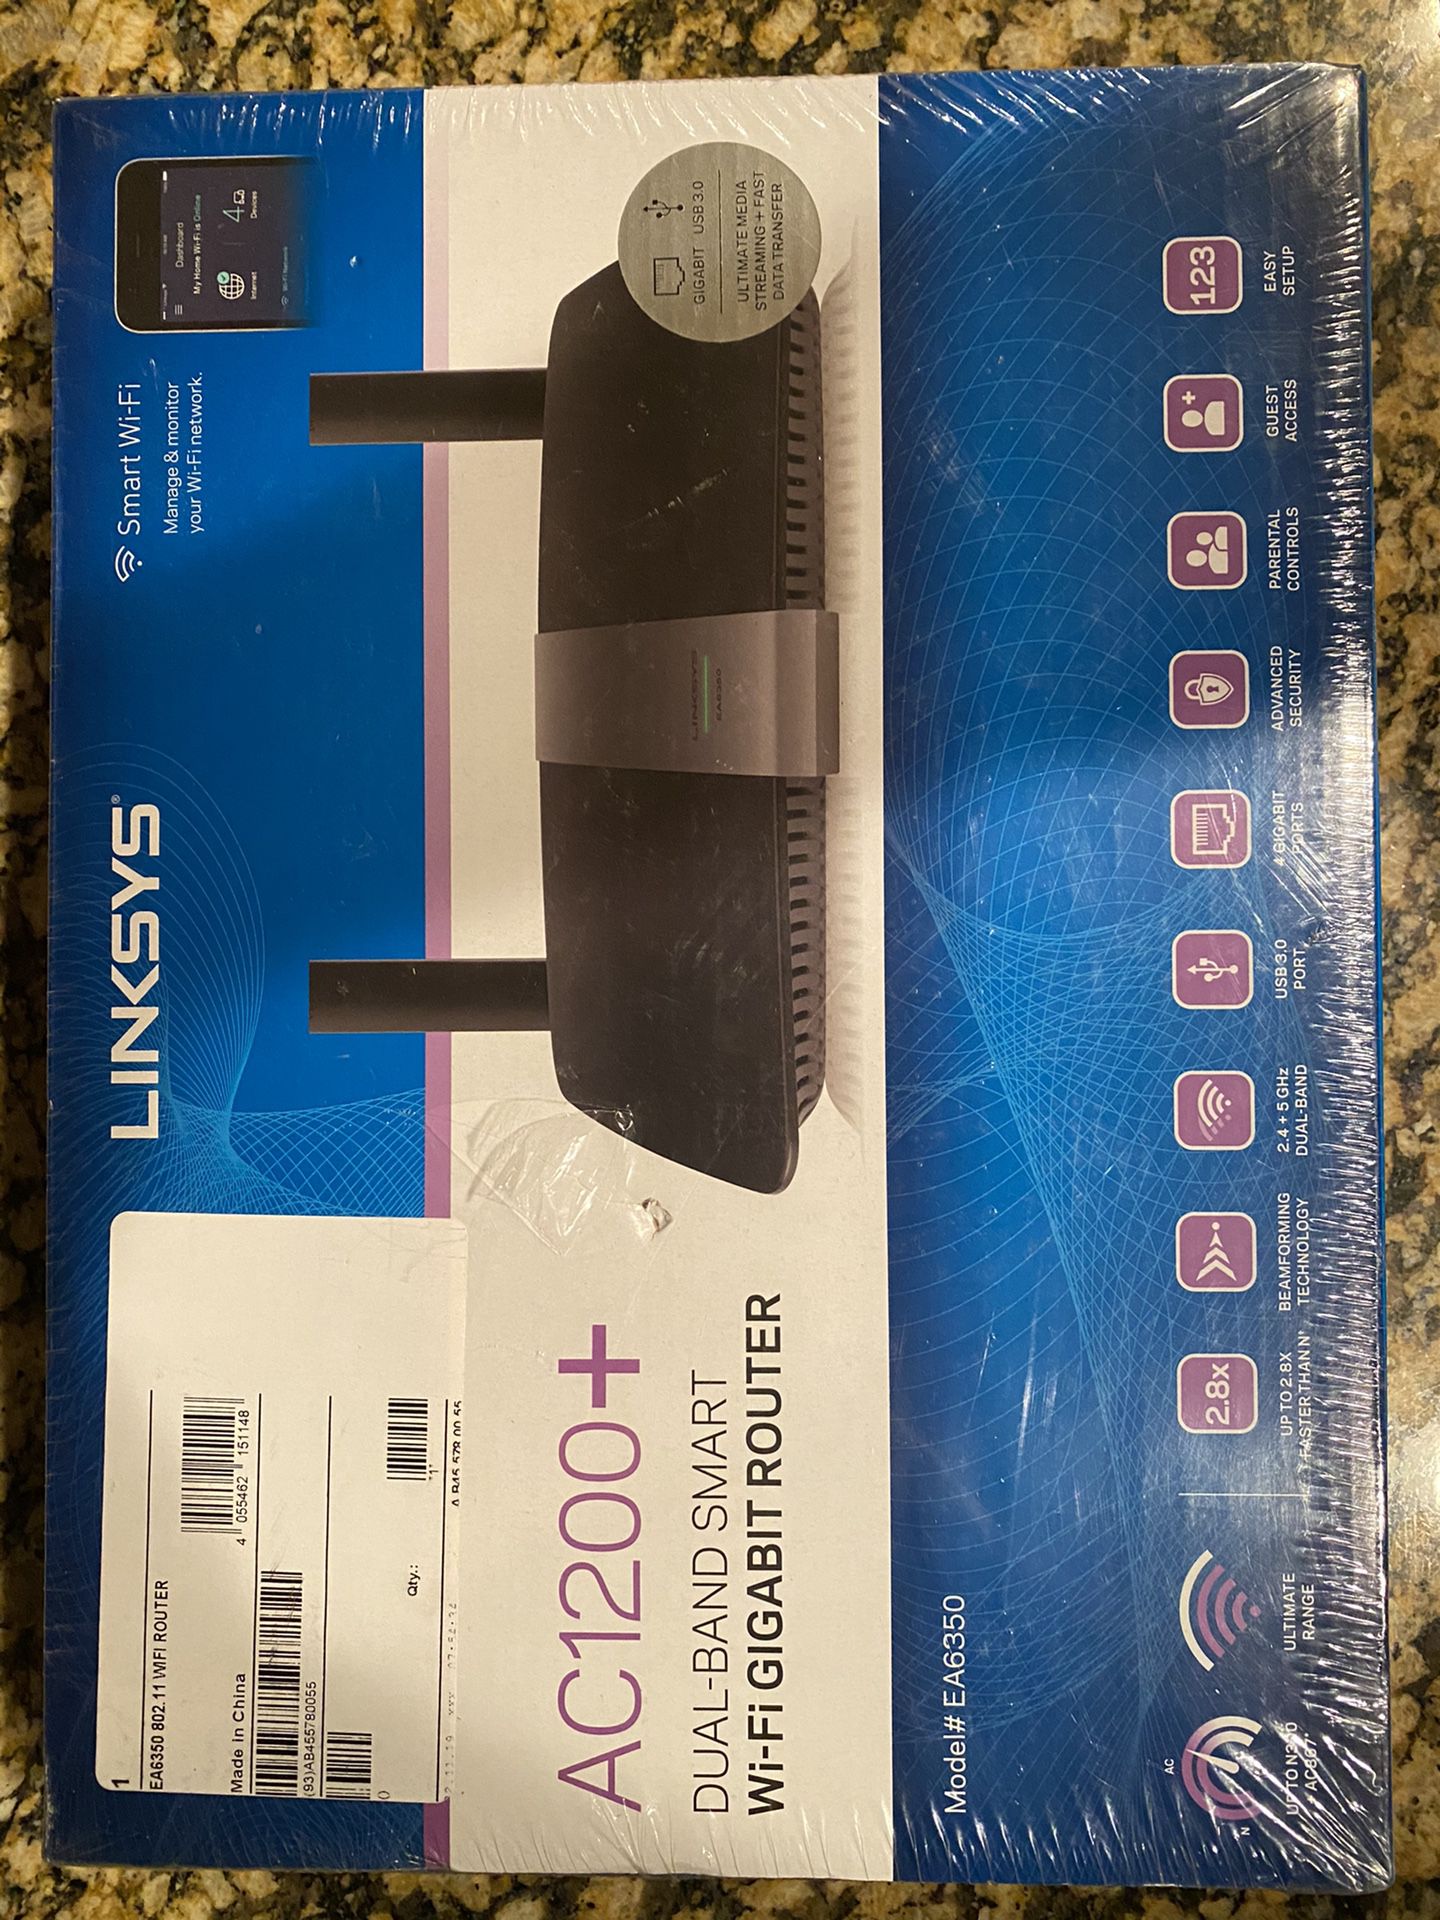 LINKSYS EA6350 AC1200+ ROUTER BRAND NEW